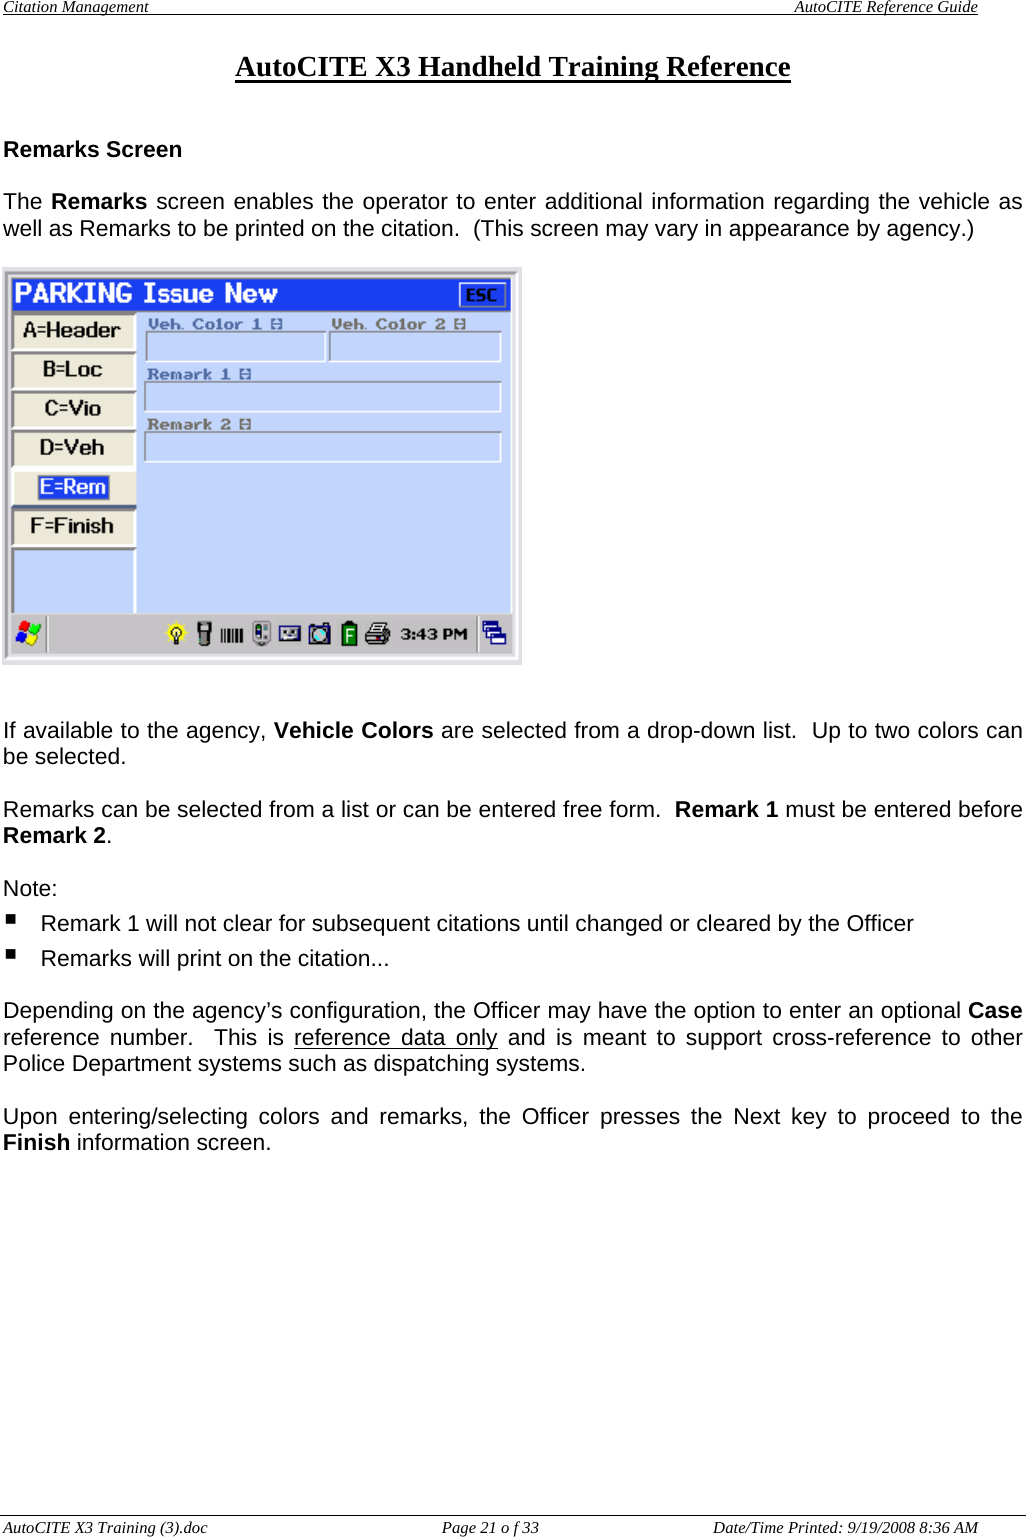 Citation Management    AutoCITE Reference Guide  AutoCITE X3 Handheld Training Reference AutoCITE X3 Training (3).doc  Page 21 o f 33  Date/Time Printed: 9/19/2008 8:36 AM Remarks Screen   The Remarks screen enables the operator to enter additional information regarding the vehicle as well as Remarks to be printed on the citation.  (This screen may vary in appearance by agency.)     If available to the agency, Vehicle Colors are selected from a drop-down list.  Up to two colors can be selected.  Remarks can be selected from a list or can be entered free form.  Remark 1 must be entered before Remark 2.    Note:   Remark 1 will not clear for subsequent citations until changed or cleared by the Officer  Remarks will print on the citation...  Depending on the agency’s configuration, the Officer may have the option to enter an optional Case reference number.  This is reference data only and is meant to support cross-reference to other Police Department systems such as dispatching systems.  Upon entering/selecting colors and remarks, the Officer presses the Next key to proceed to the Finish information screen.  